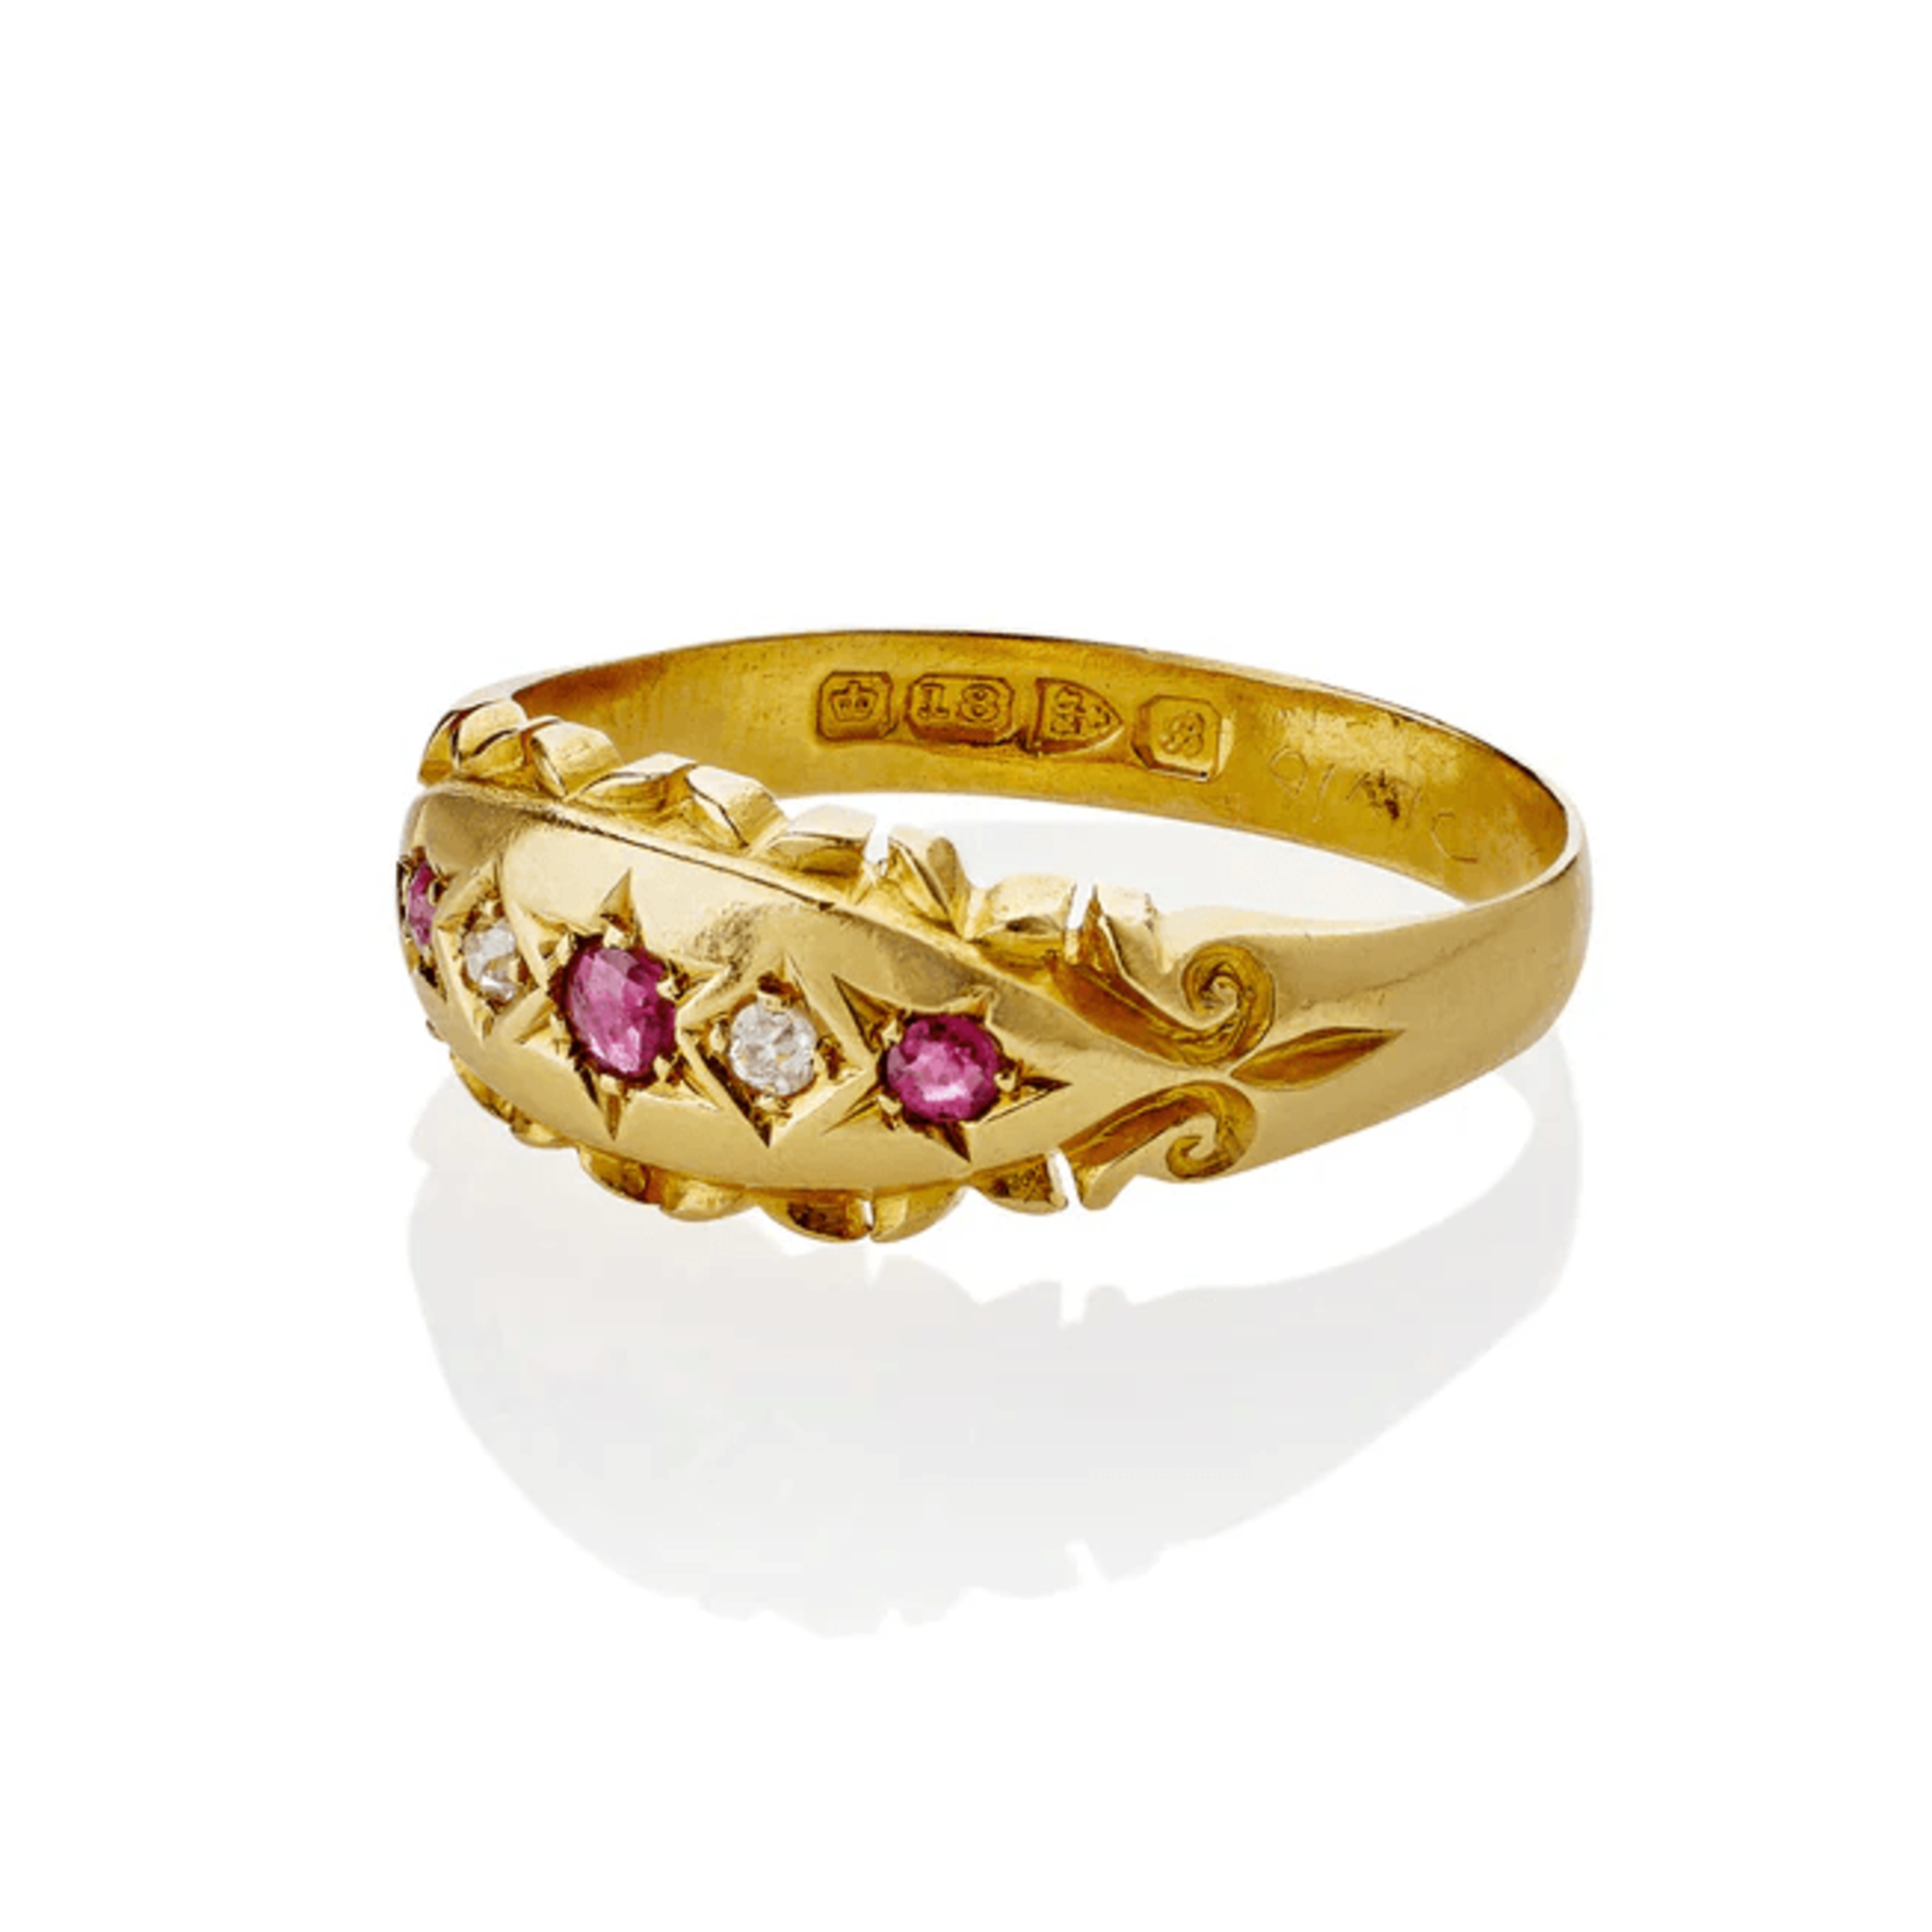 English Victorian 18KT Yellow Gold Ruby & Diamond Ring side